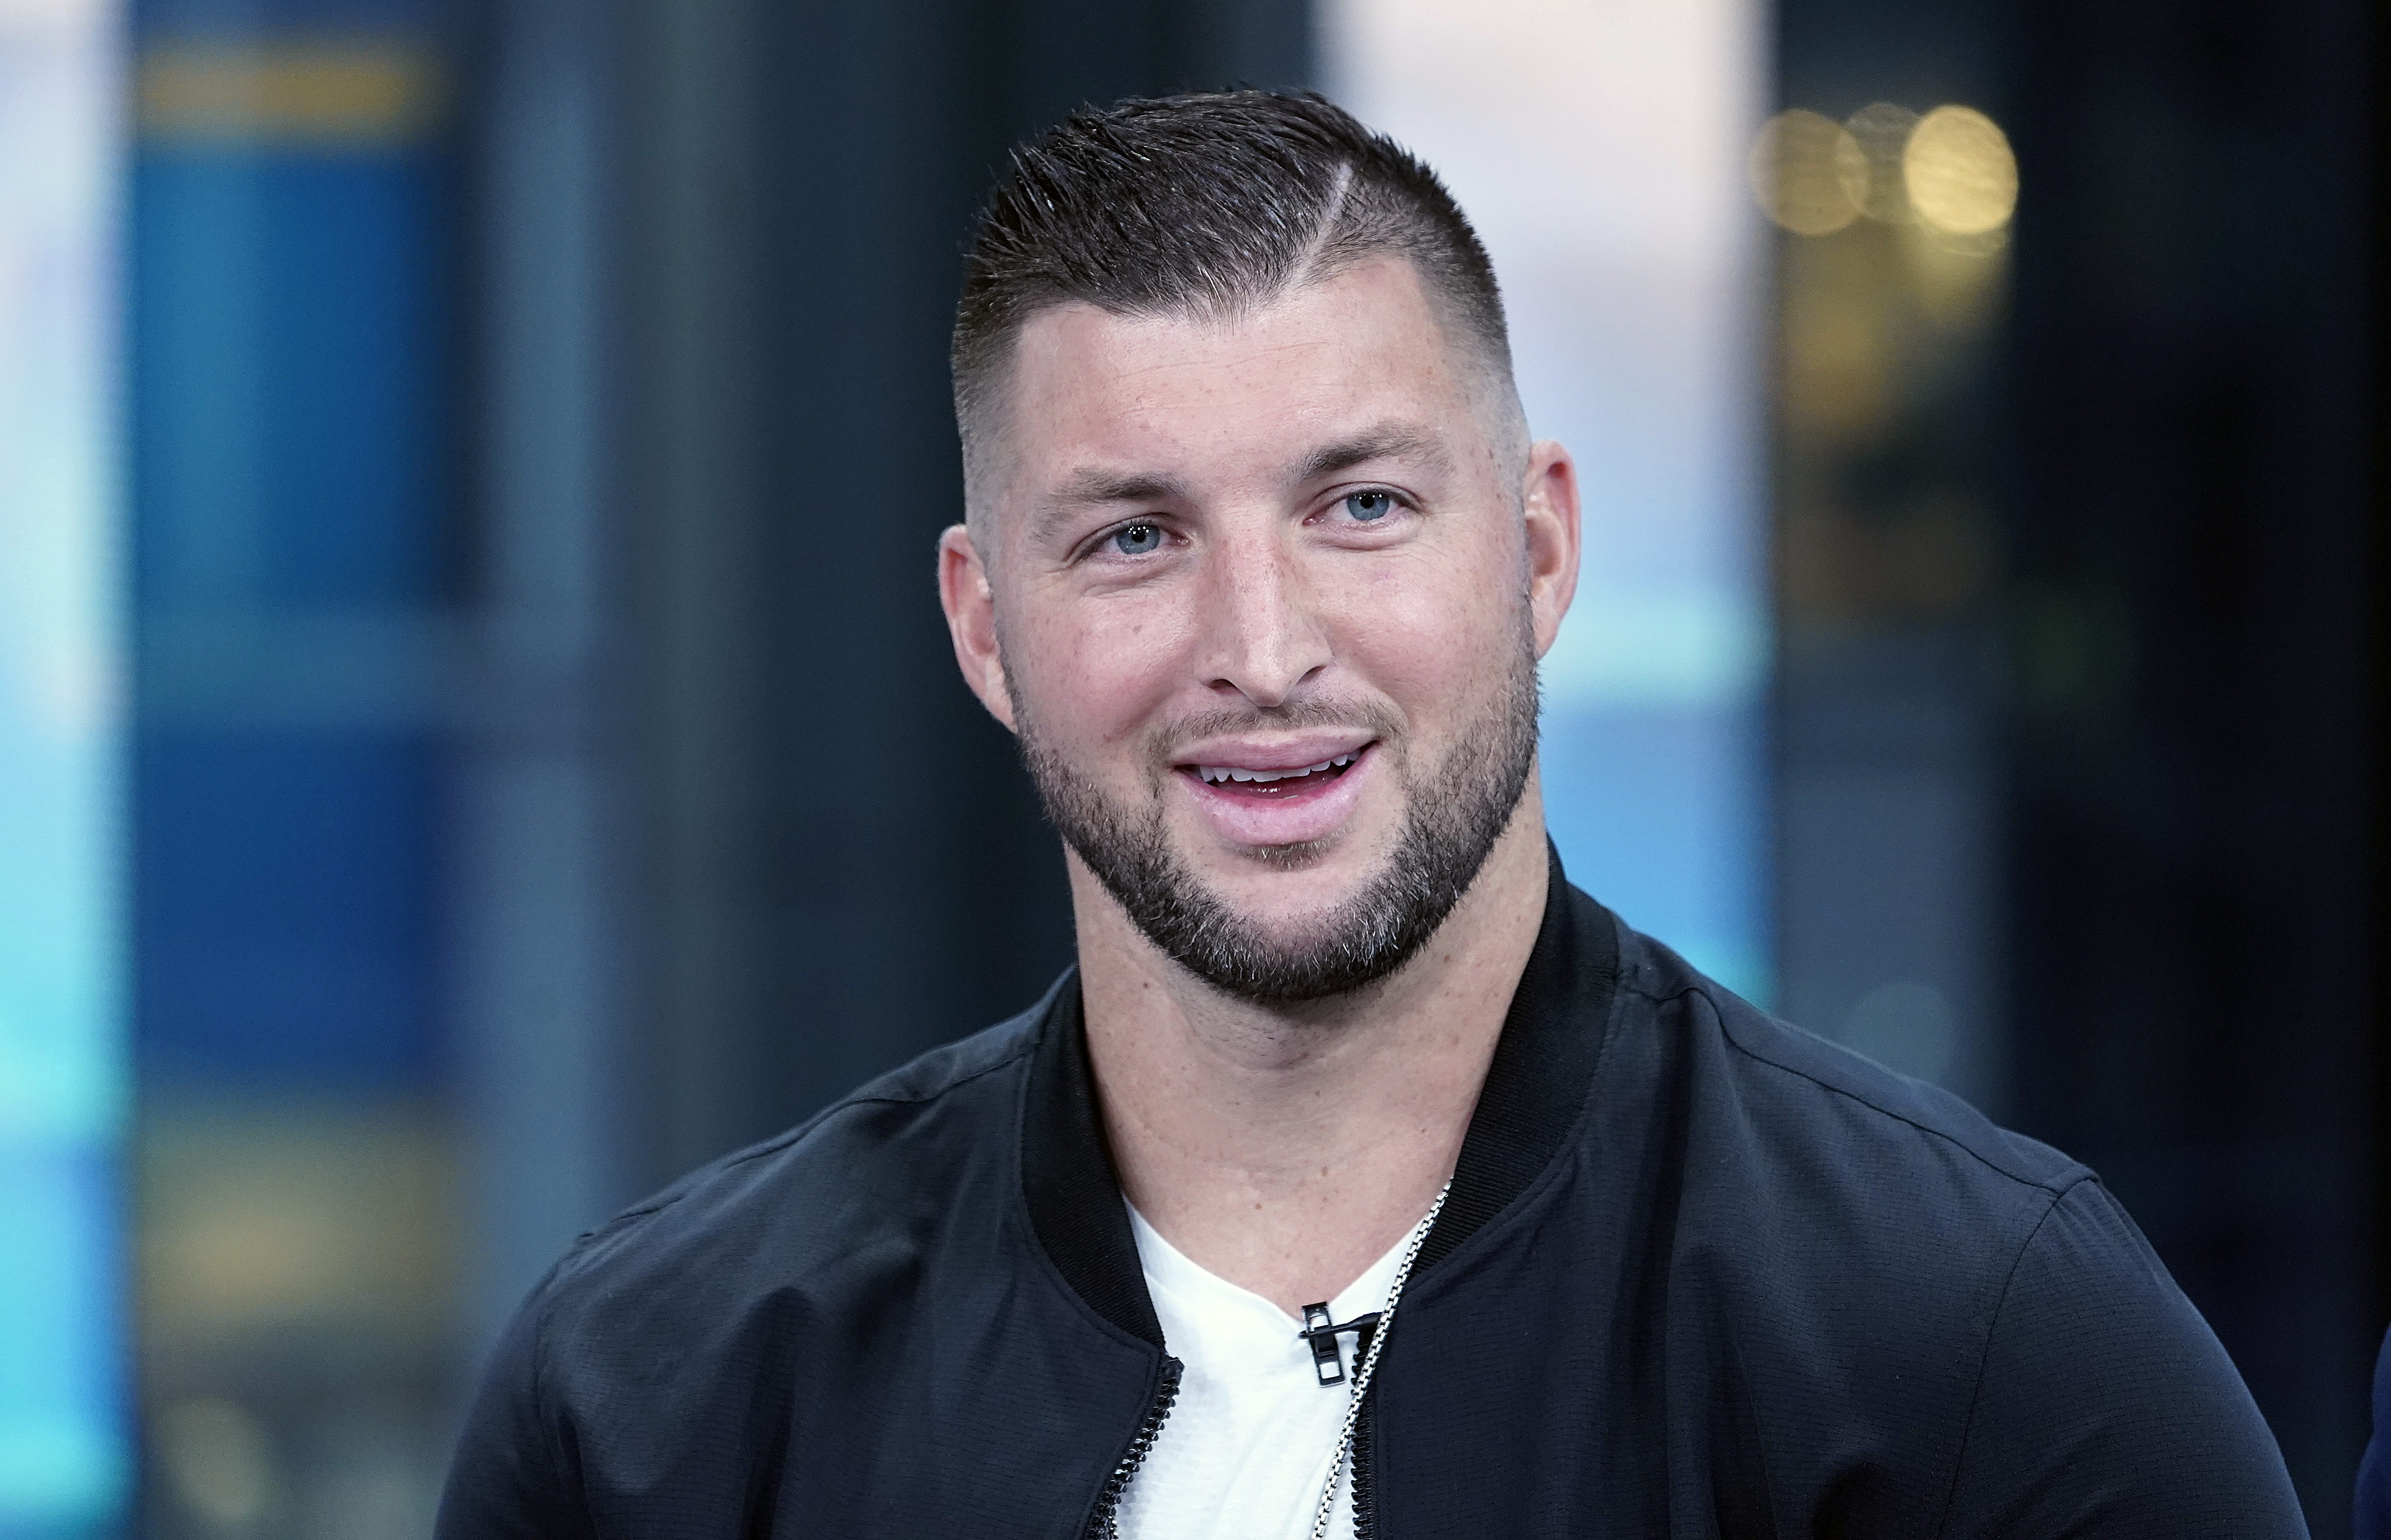 Tim Tebow on October 09, 2019 in New York City | Source: Getty Images